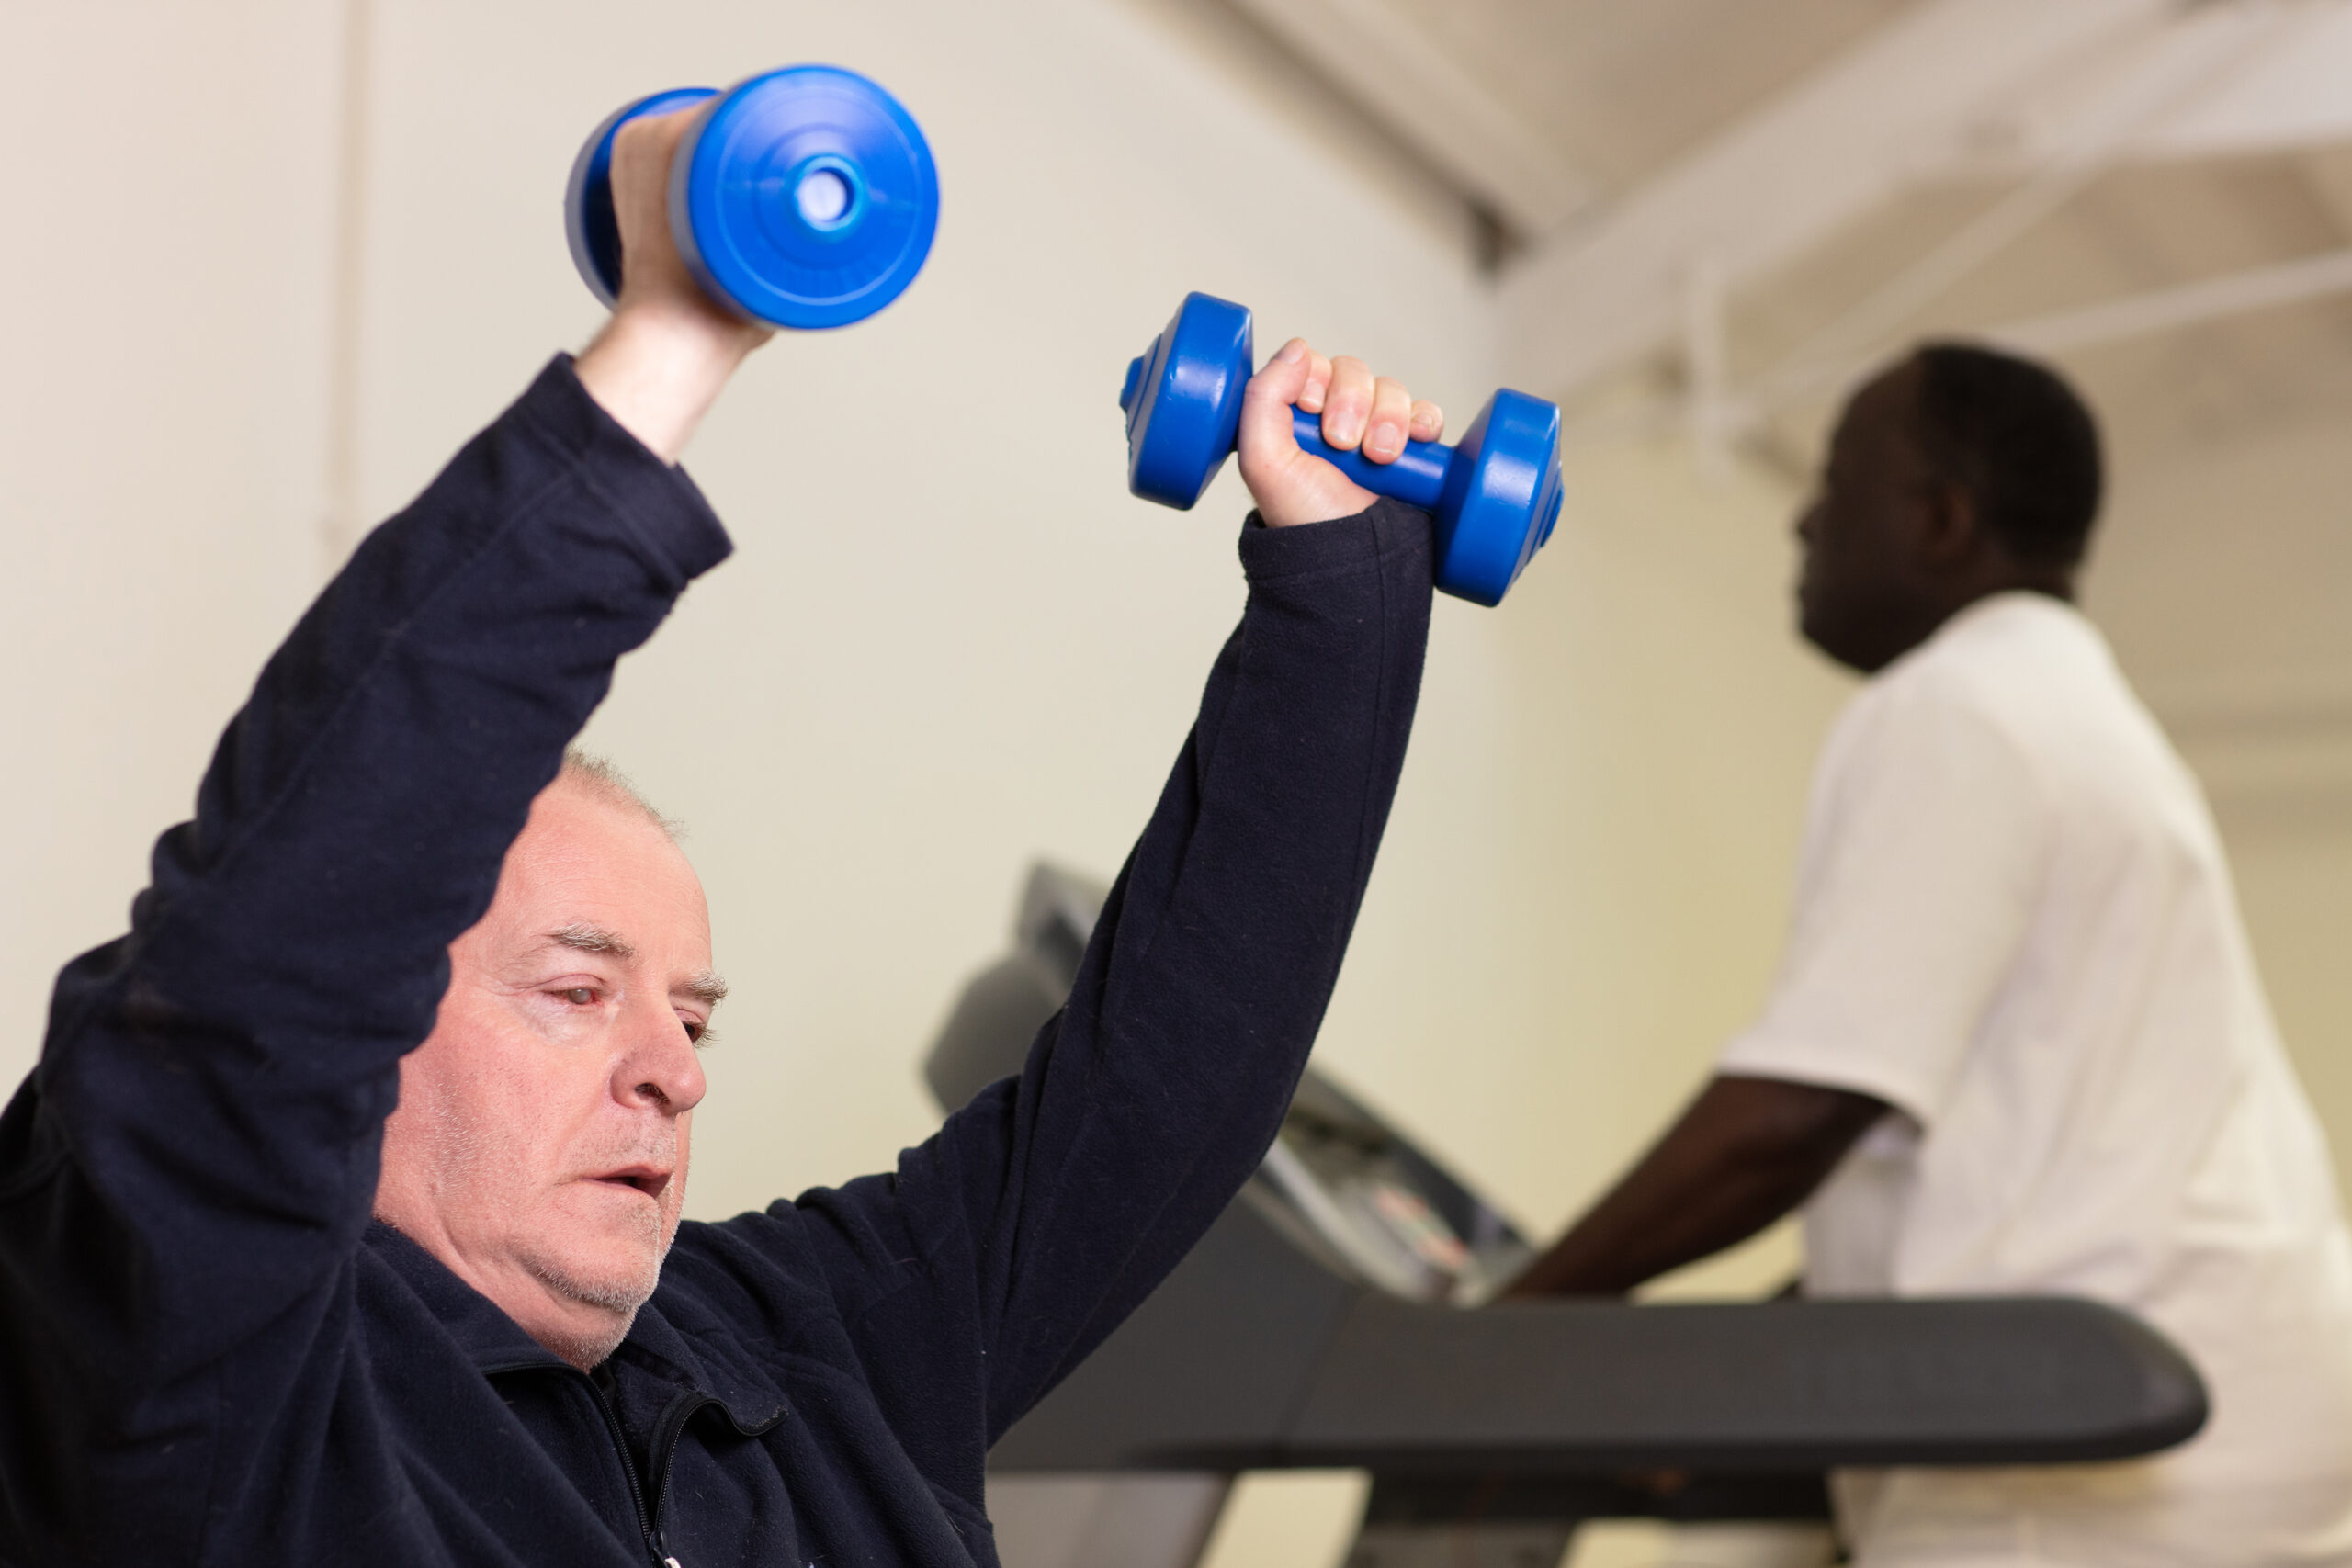 A man is sitting and lifting two blue dumbell weights over his head while another man is blurred in the background running on a treadmill.